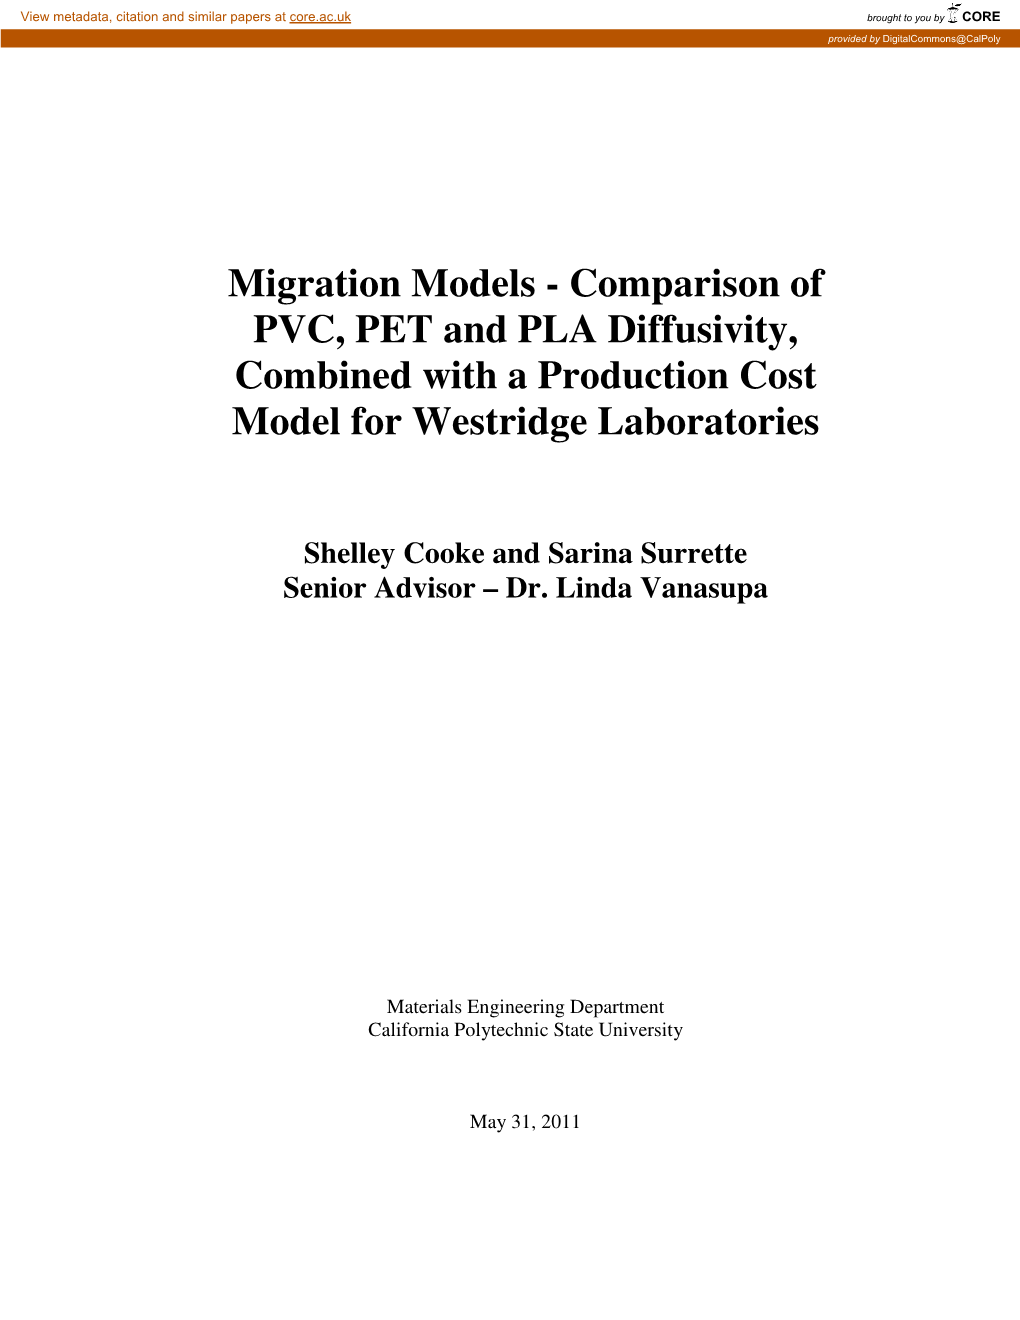 Migration Models - Comparison of PVC, PET and PLA Diffusivity, Combined with a Production Cost Model for Westridge Laboratories